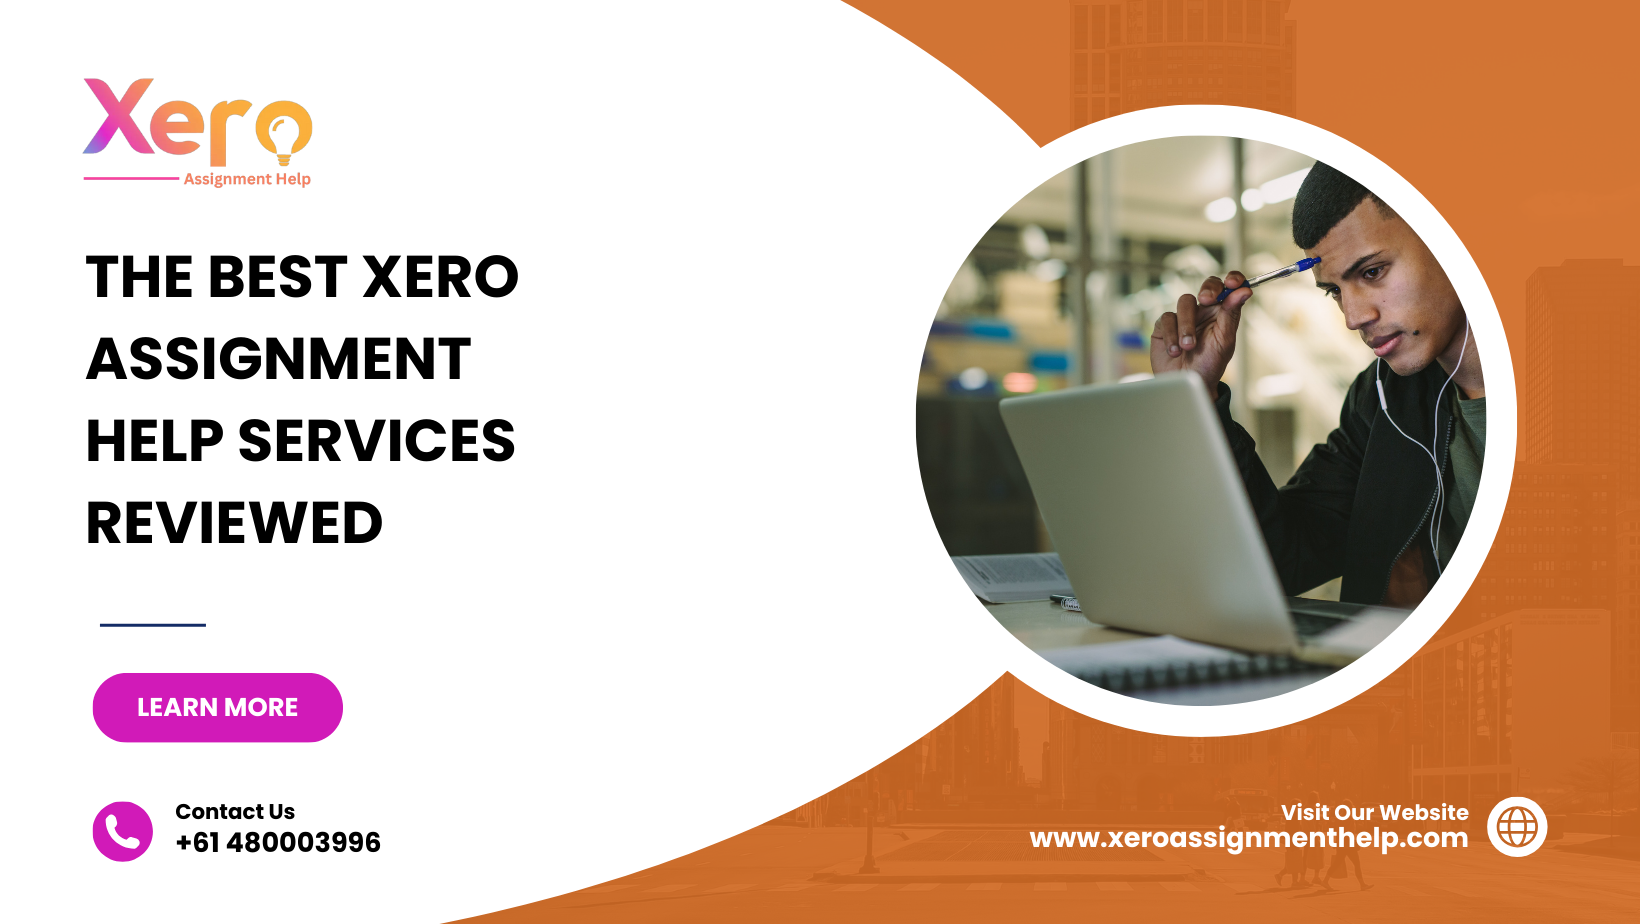 The Best Xero Assignment Help Services Reviewed